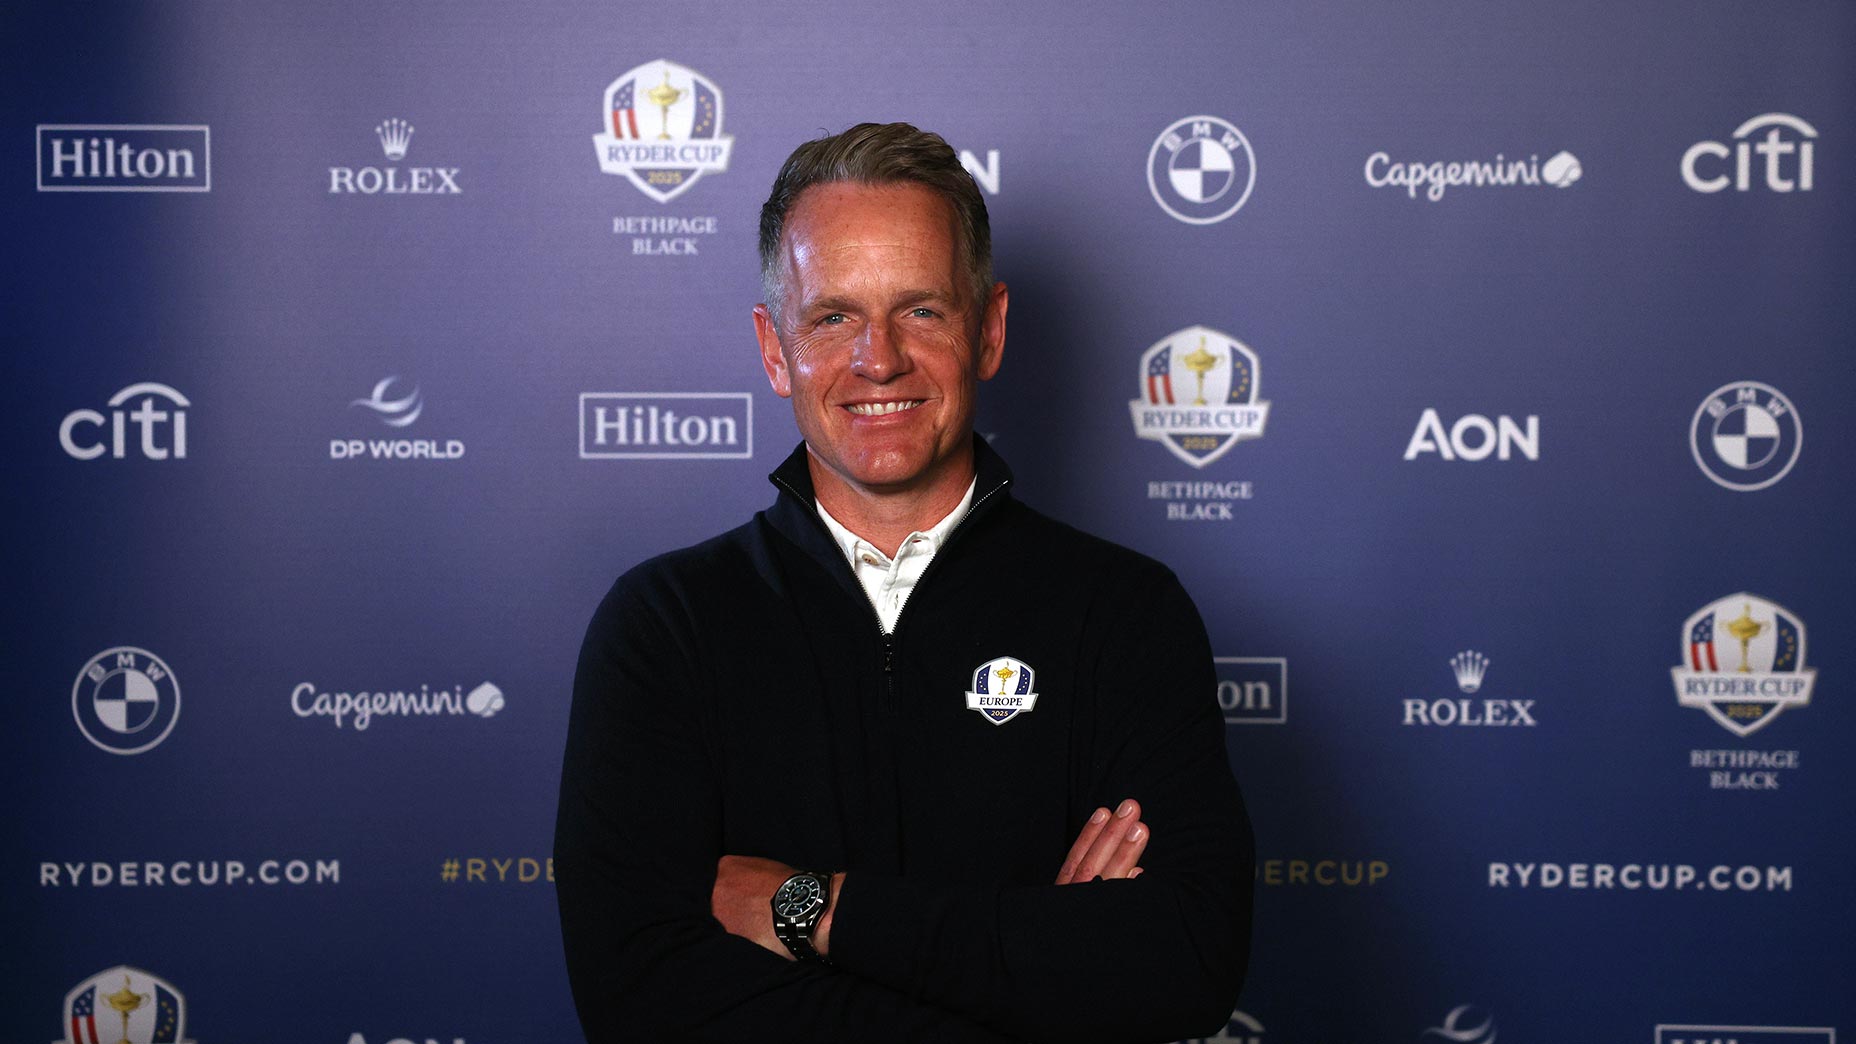 luke donald stands with arms crossed in front of ryder cup banner